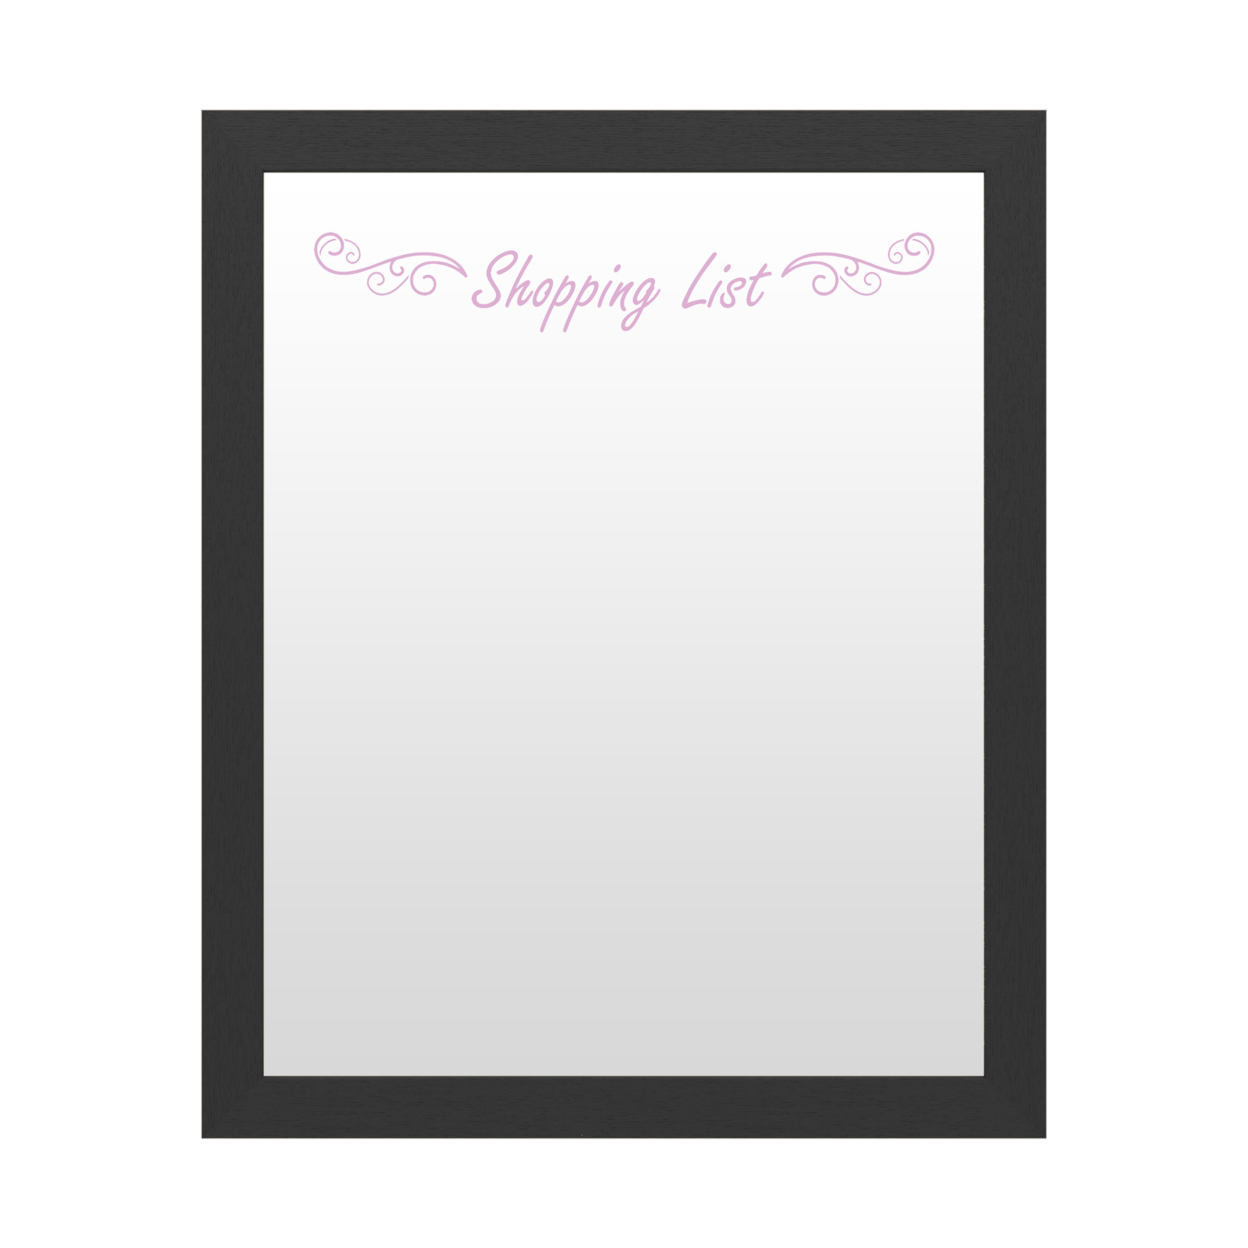 Dry Erase 16 X 20 Marker Board With Printed Artwork - Shopping List 2 White Board - Ready To Hang